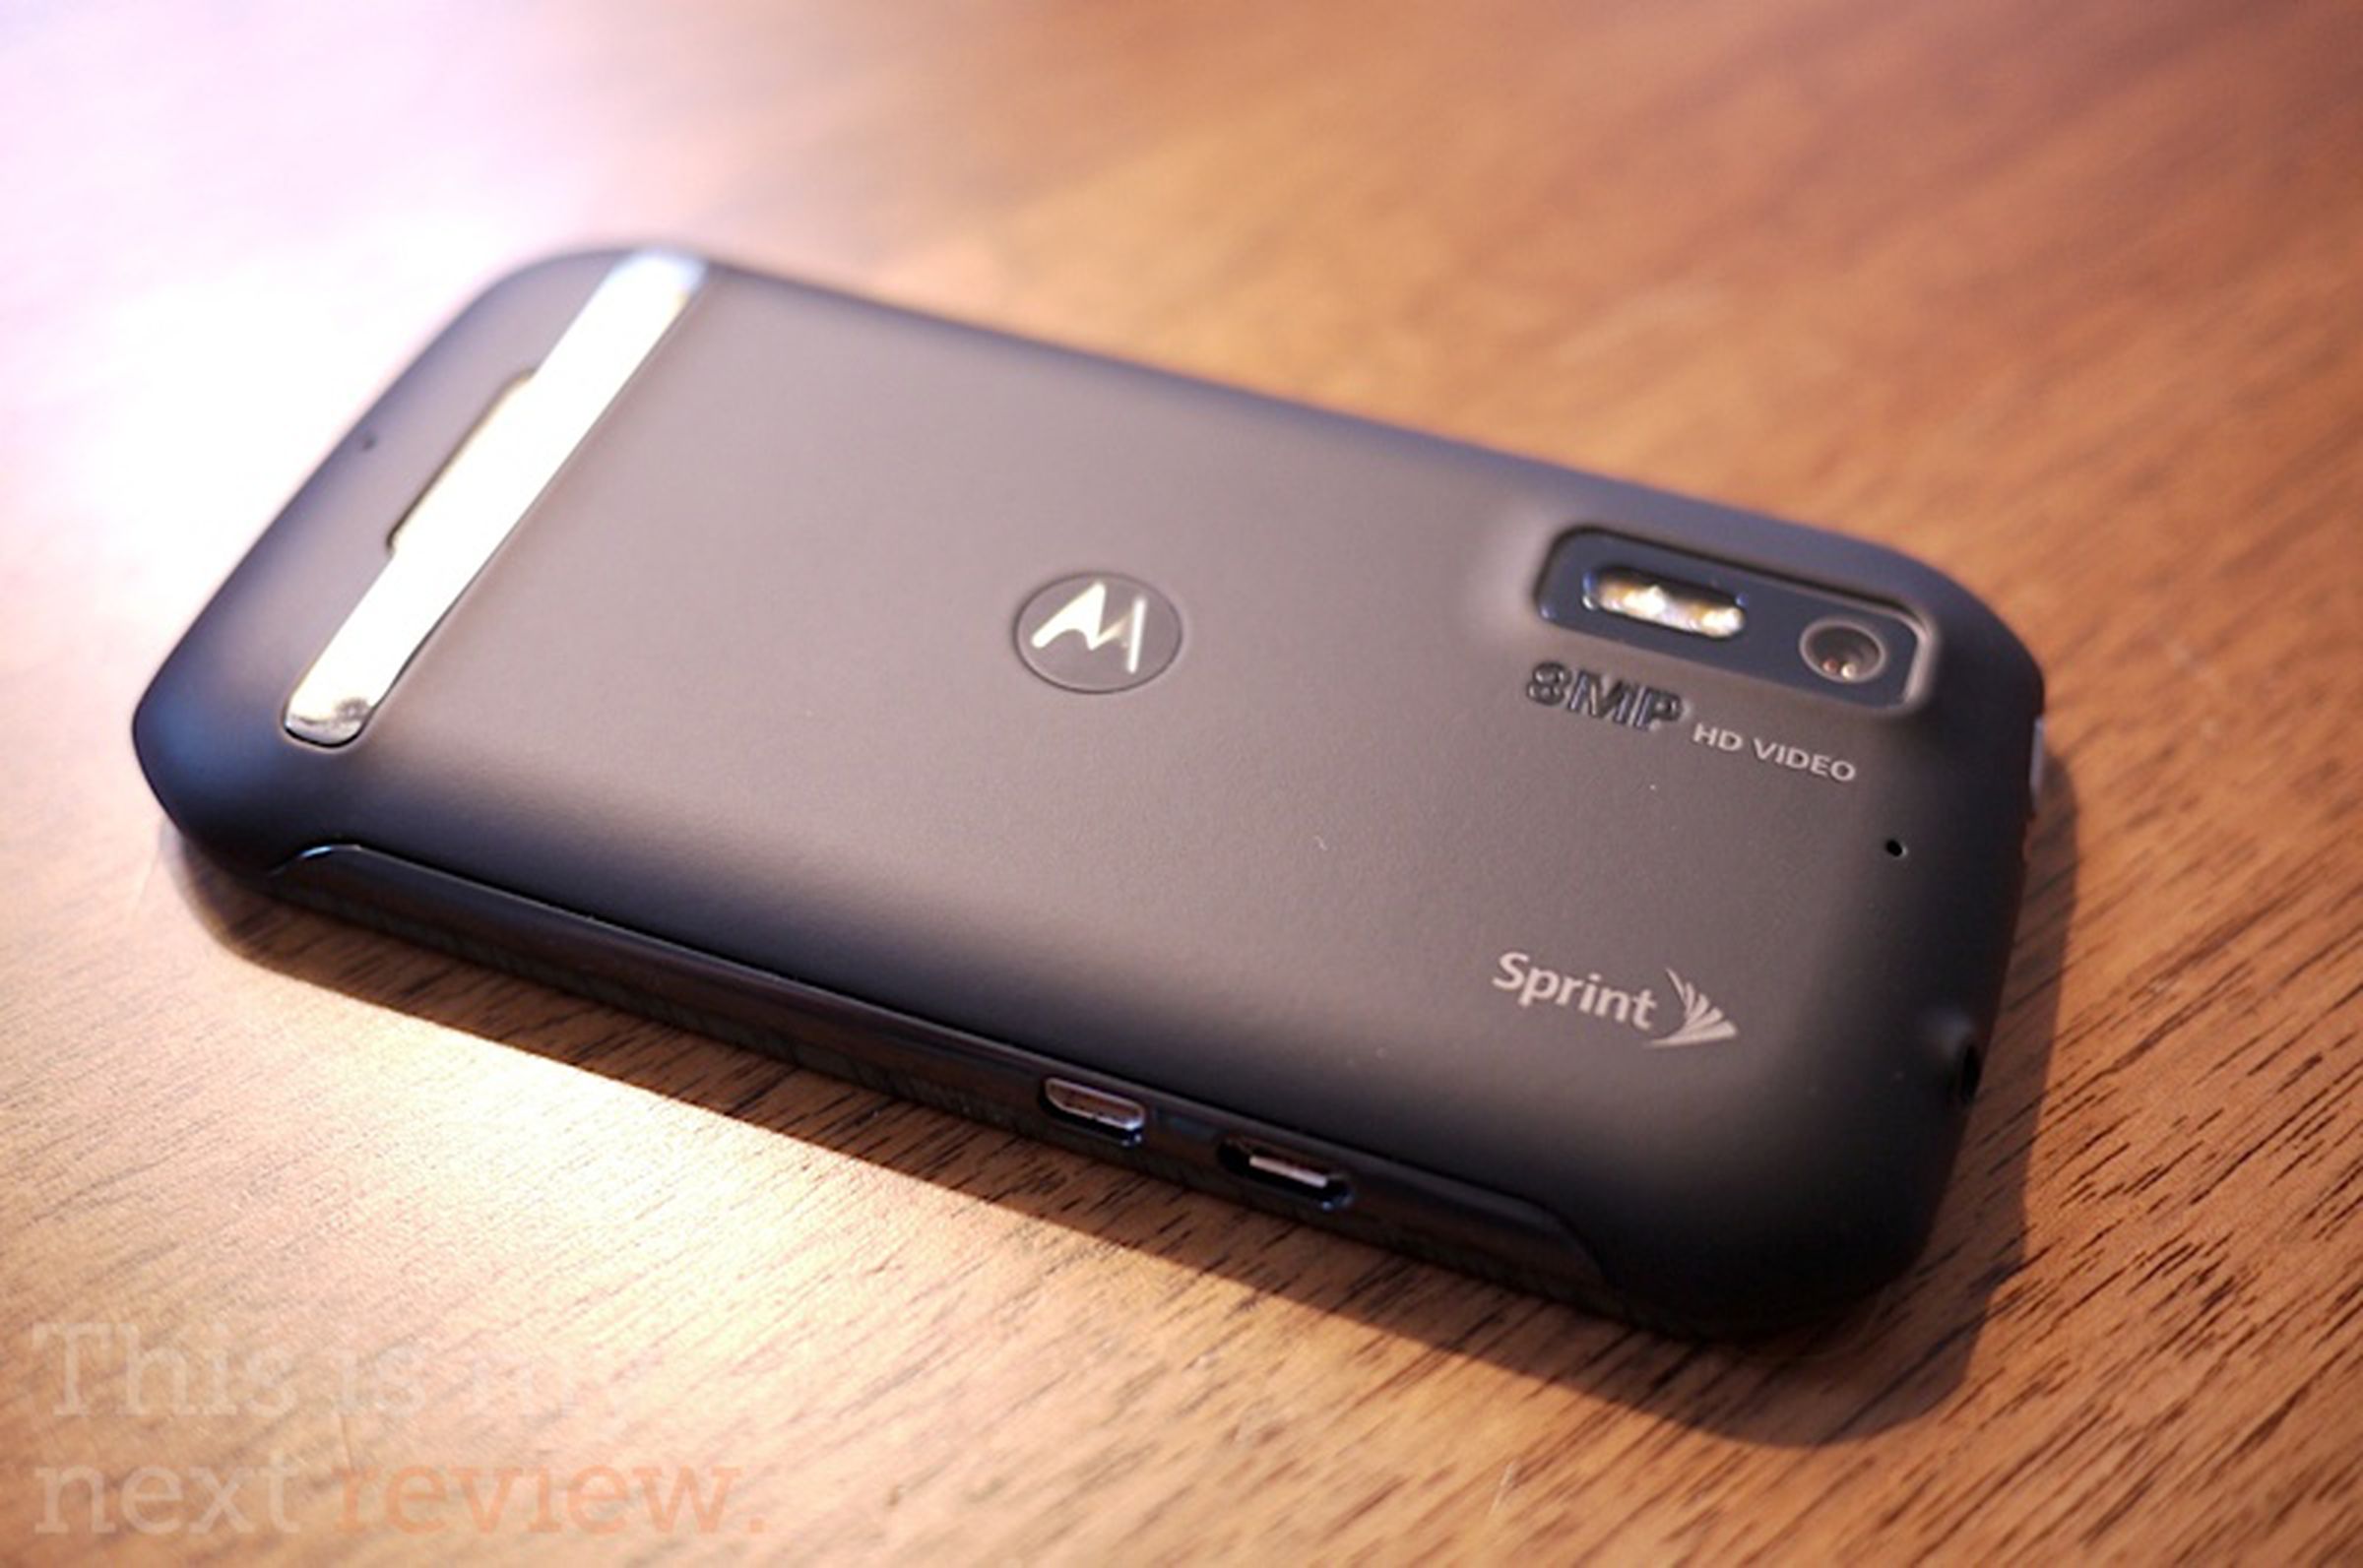 Photon 4G review hands-on